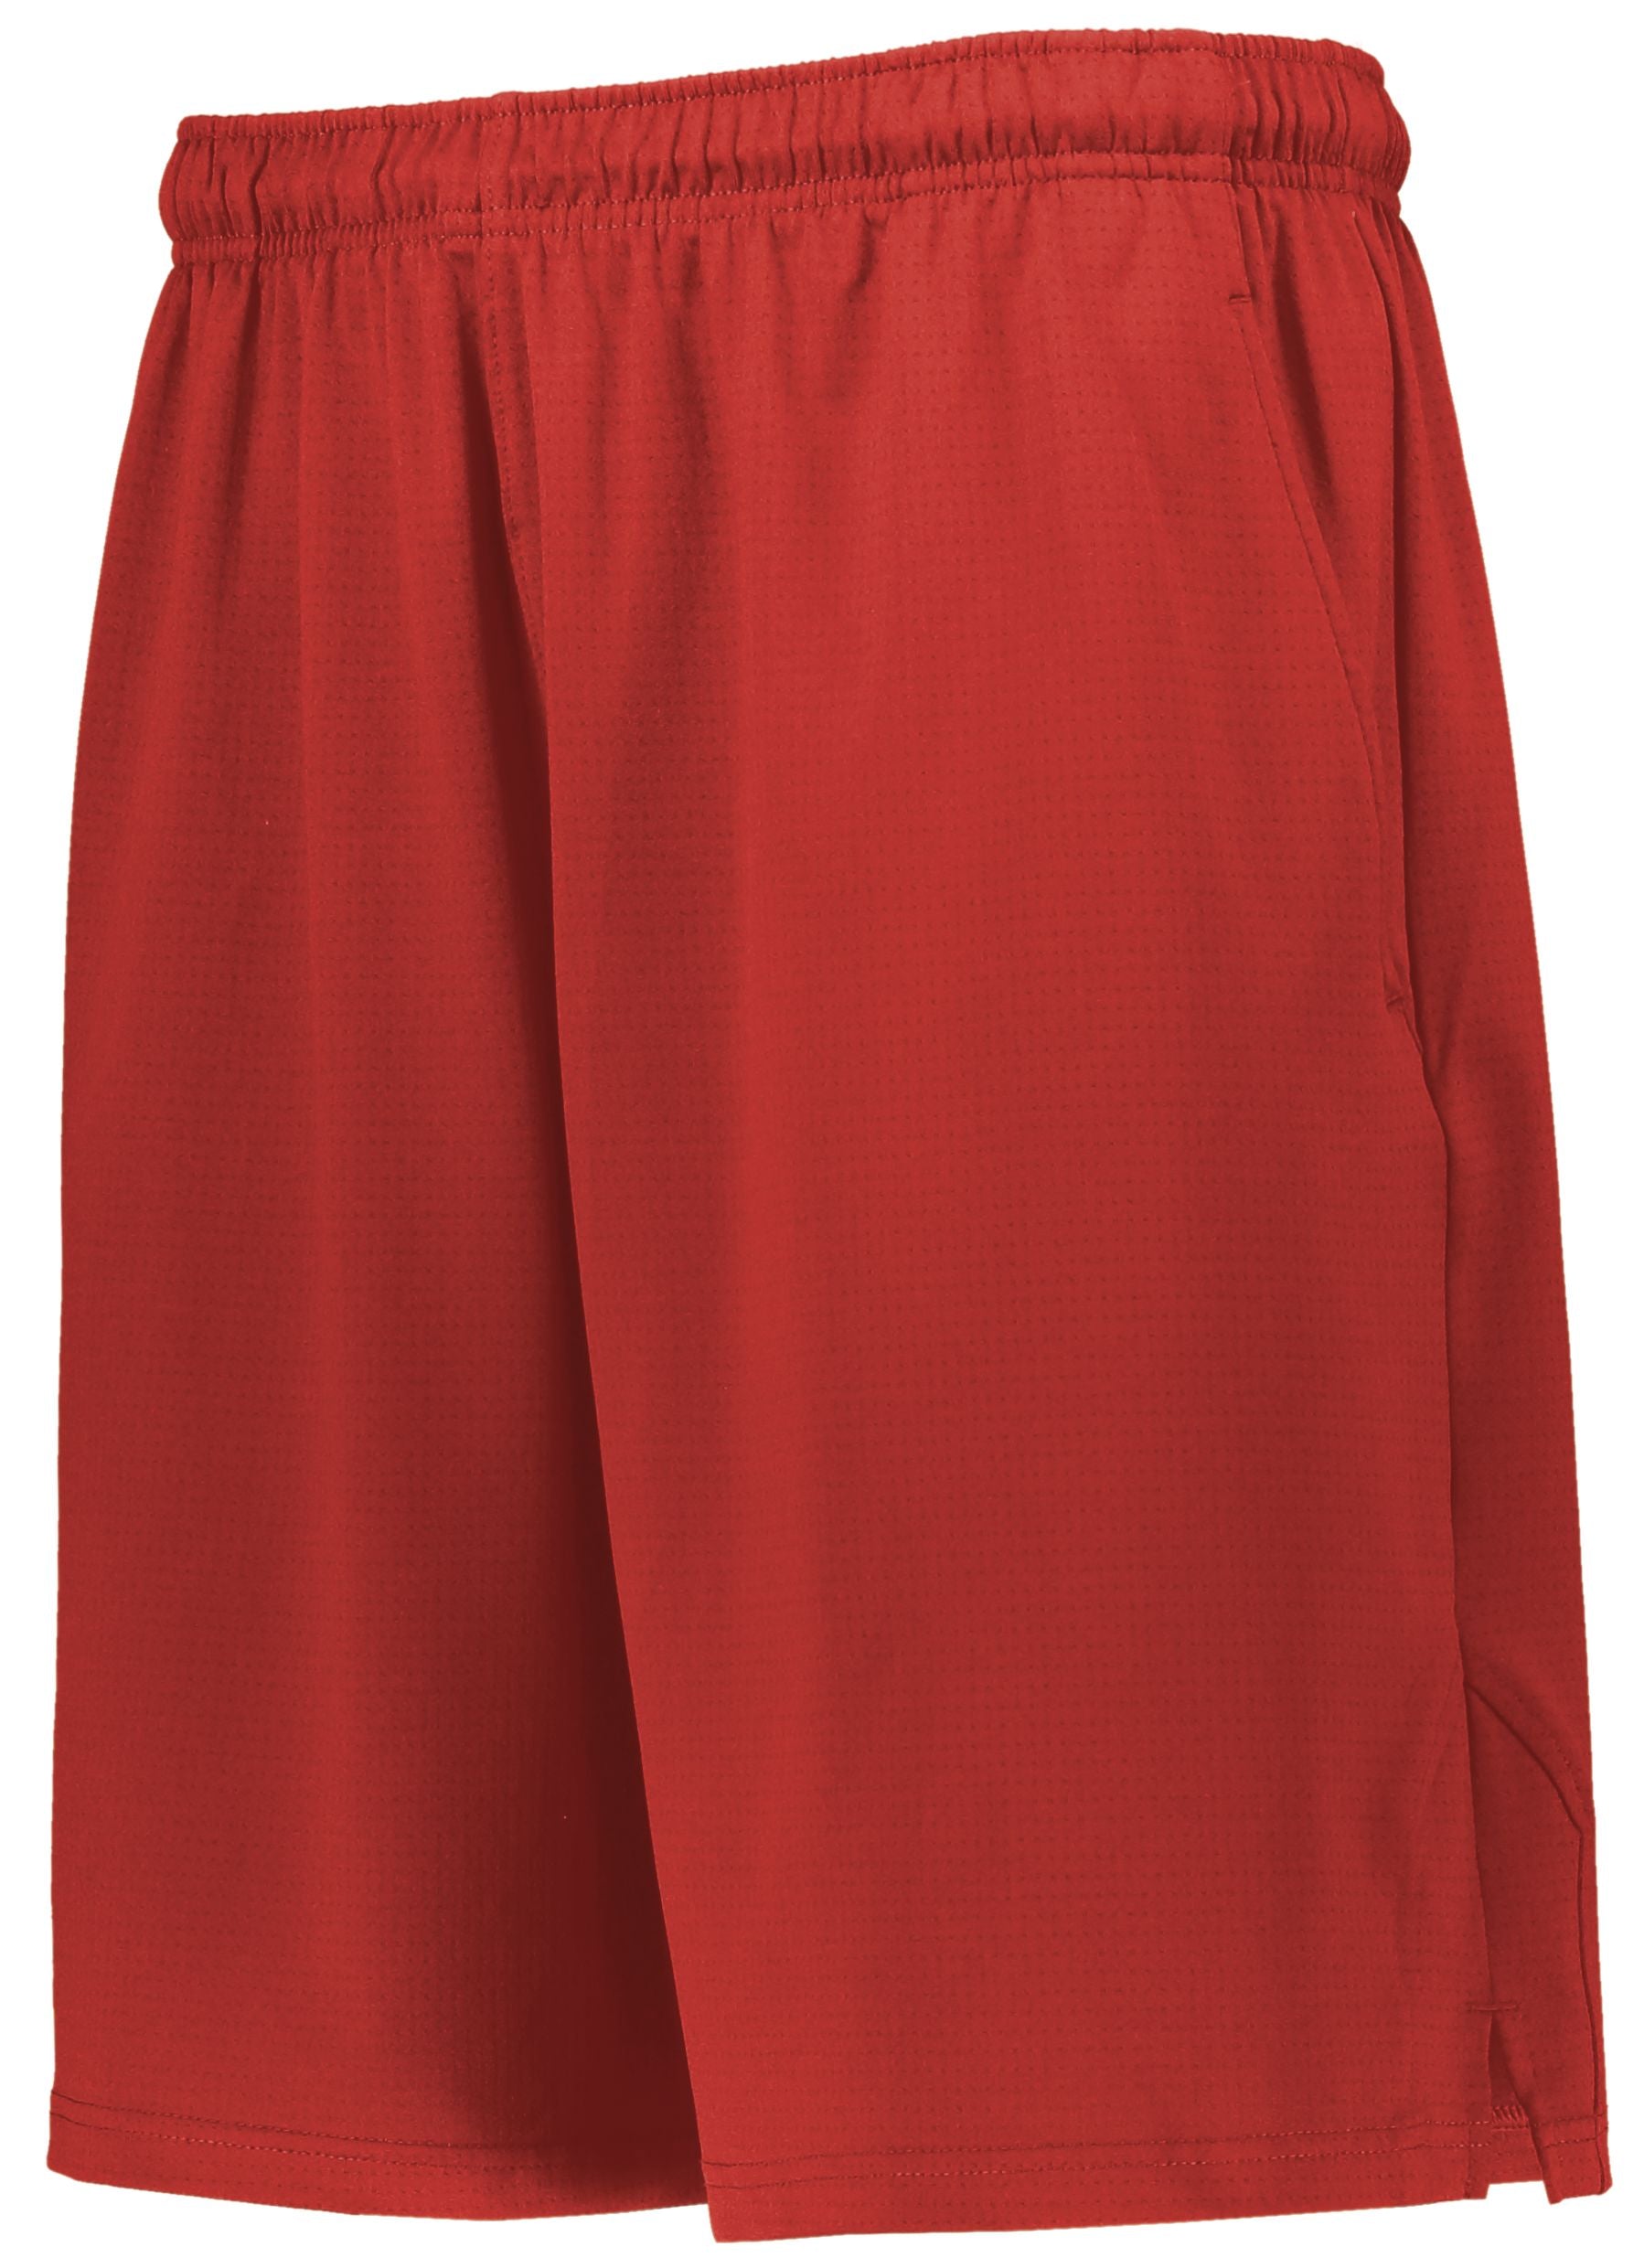 Russell Athletic Team Driven Coaches Shorts in True Red  -Part of the Adult, Adult-Shorts, Russell-Athletic-Products product lines at KanaleyCreations.com